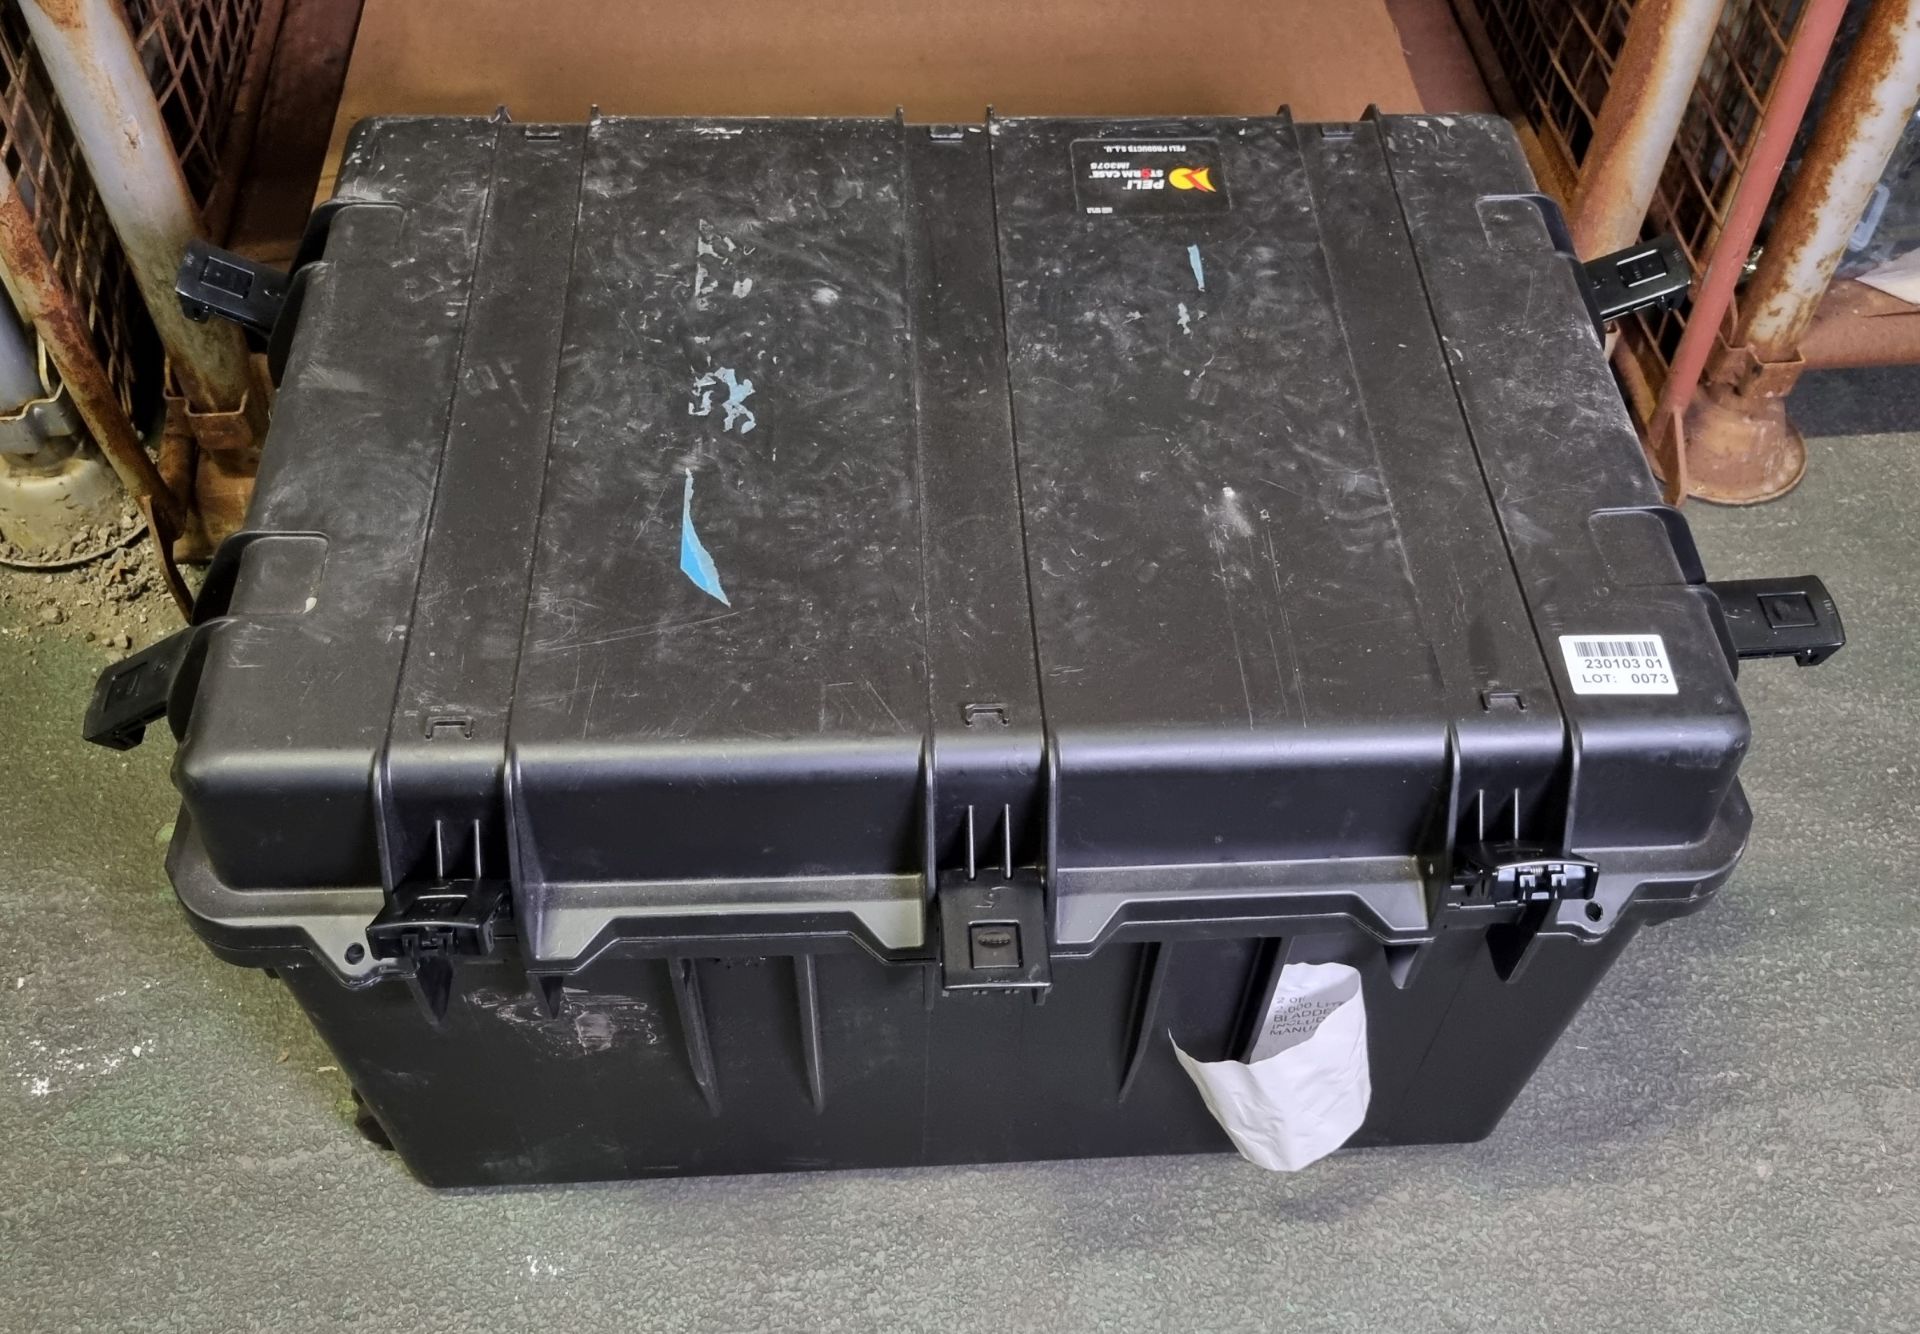 2000L Water Bladder ICD in Peli im3075 Storm case - Image 2 of 5